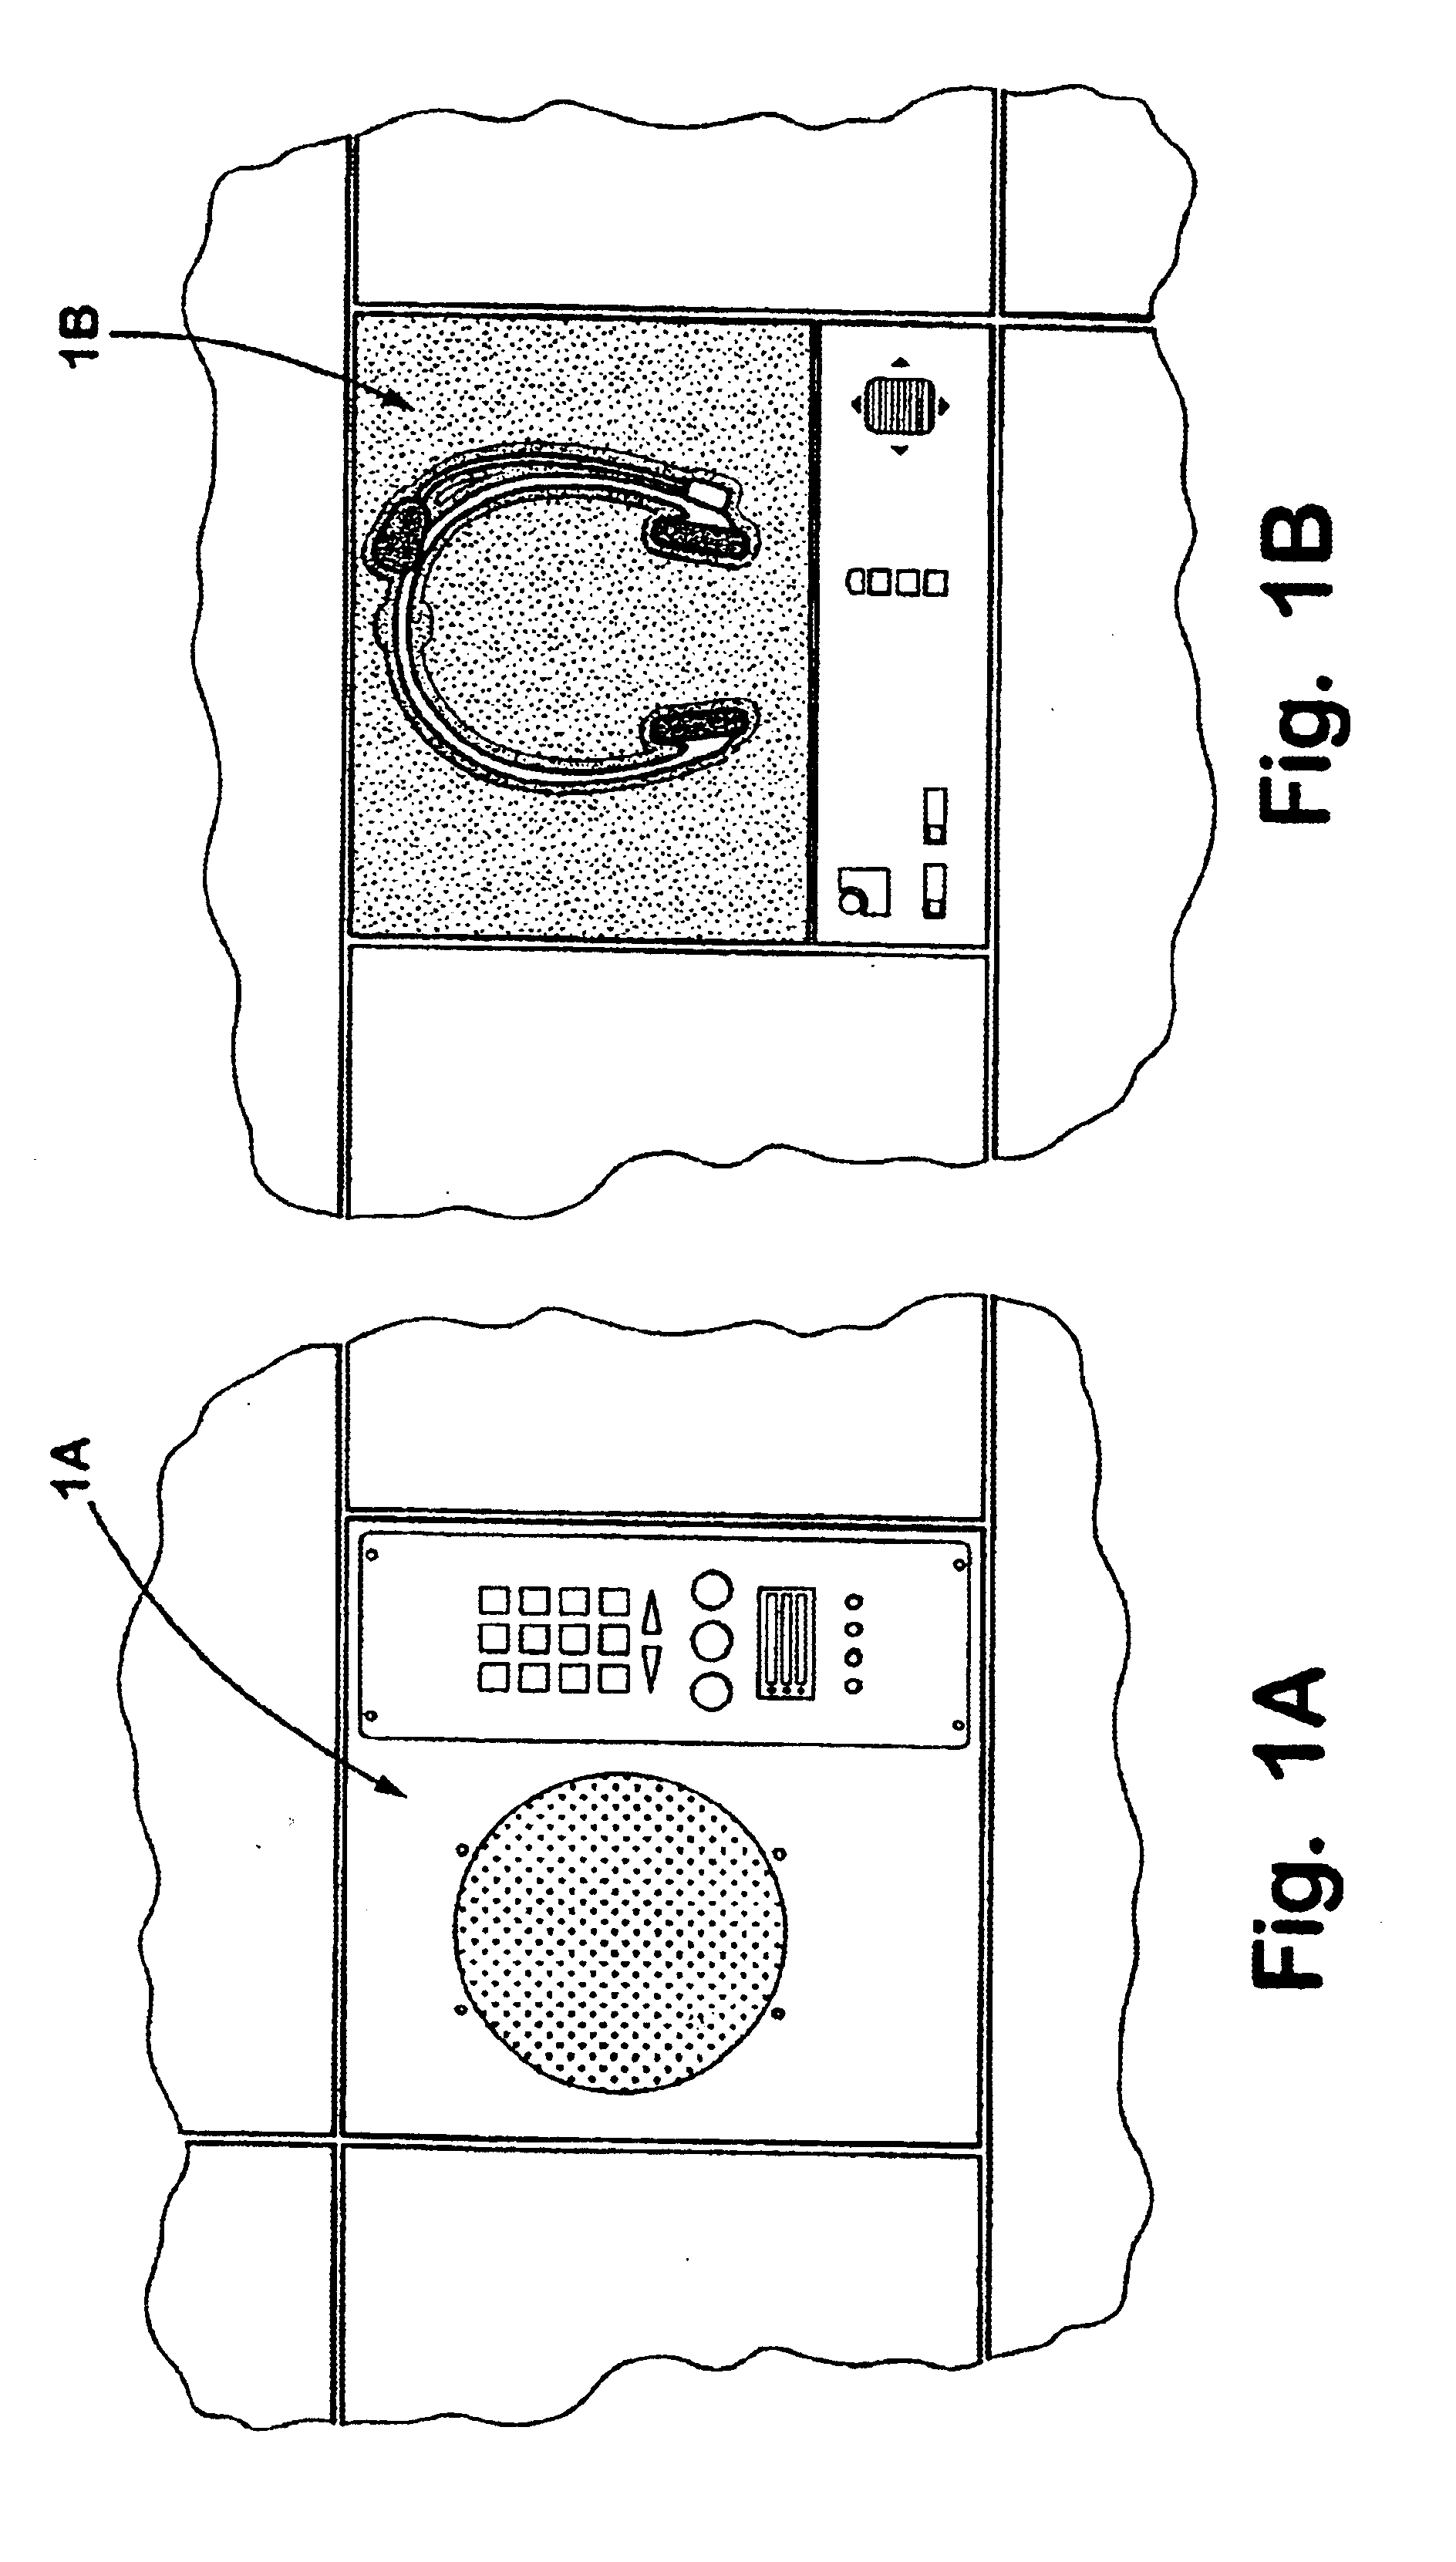 Partition panel with modular appliance mounting arrangement